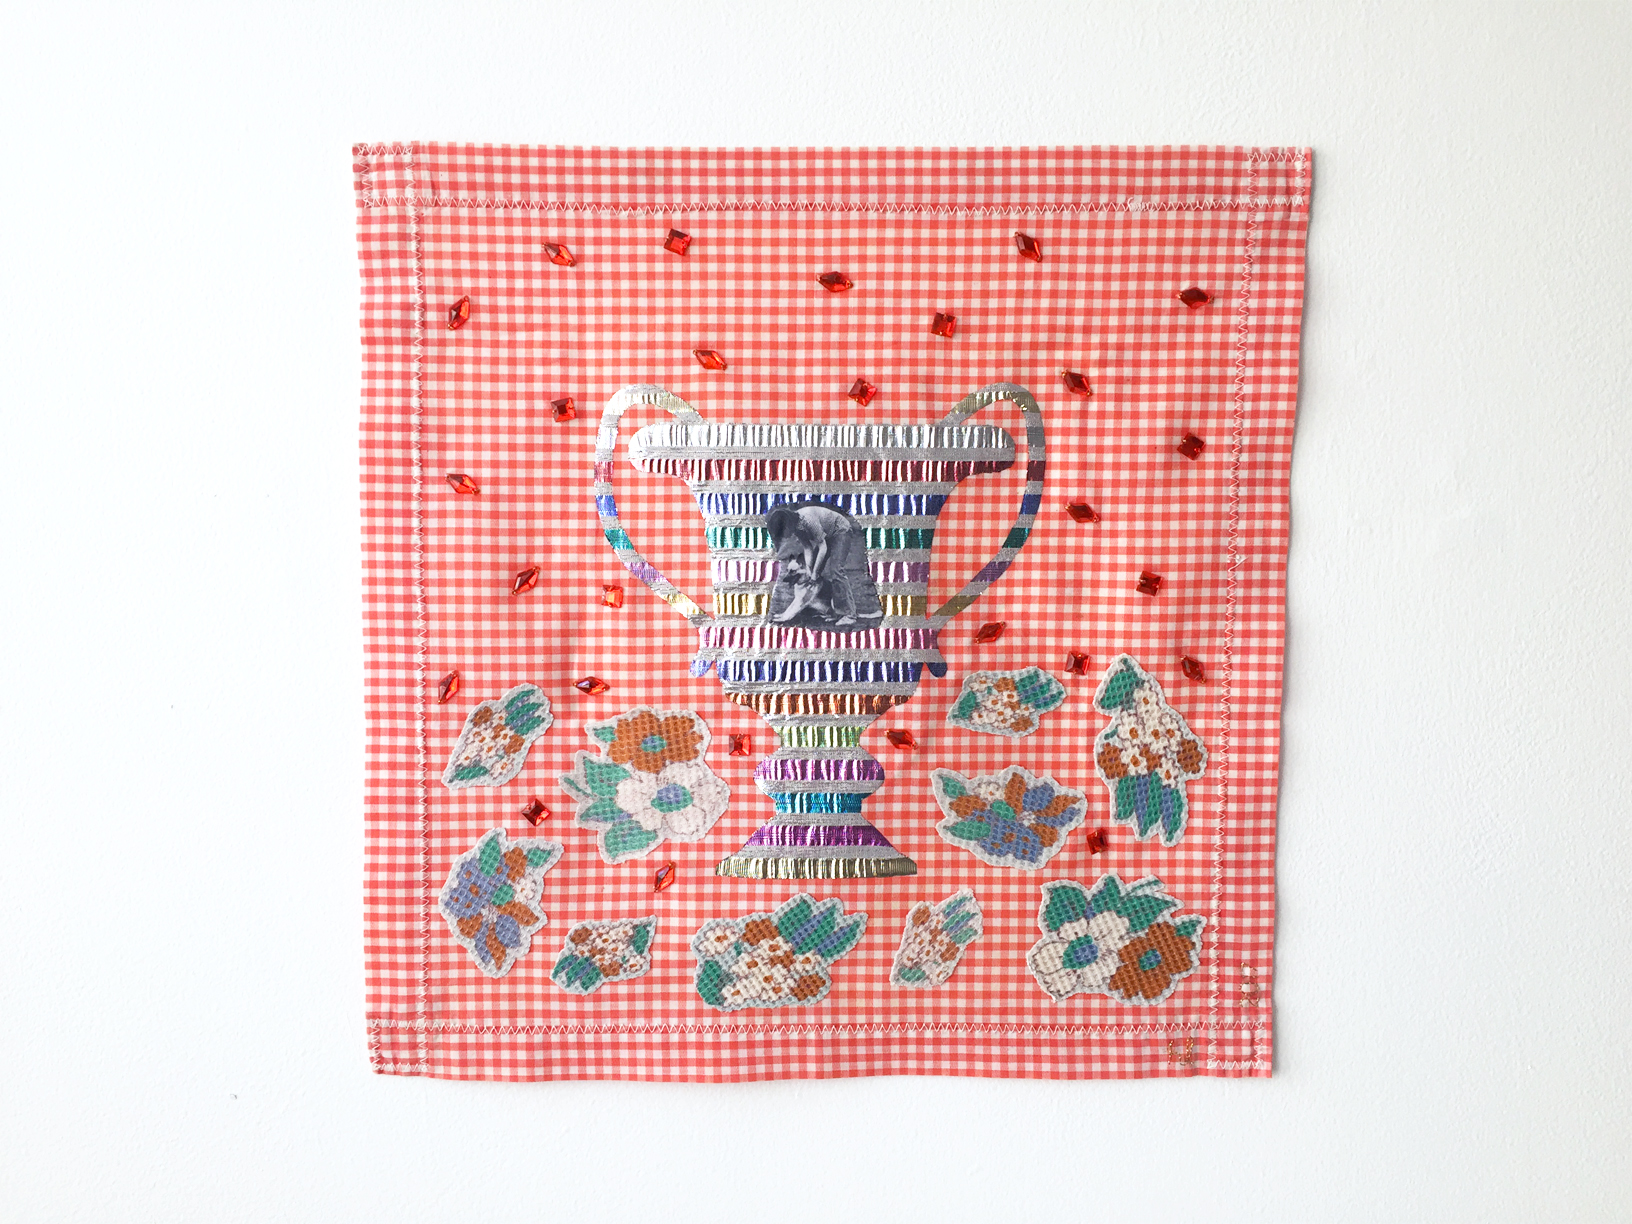 Number 1 Best Friend #3, 2017, textile object, found fabric on handmade cotton placemat, digital print on cotton, polyester, found plastic gems, 360mm x 360mm